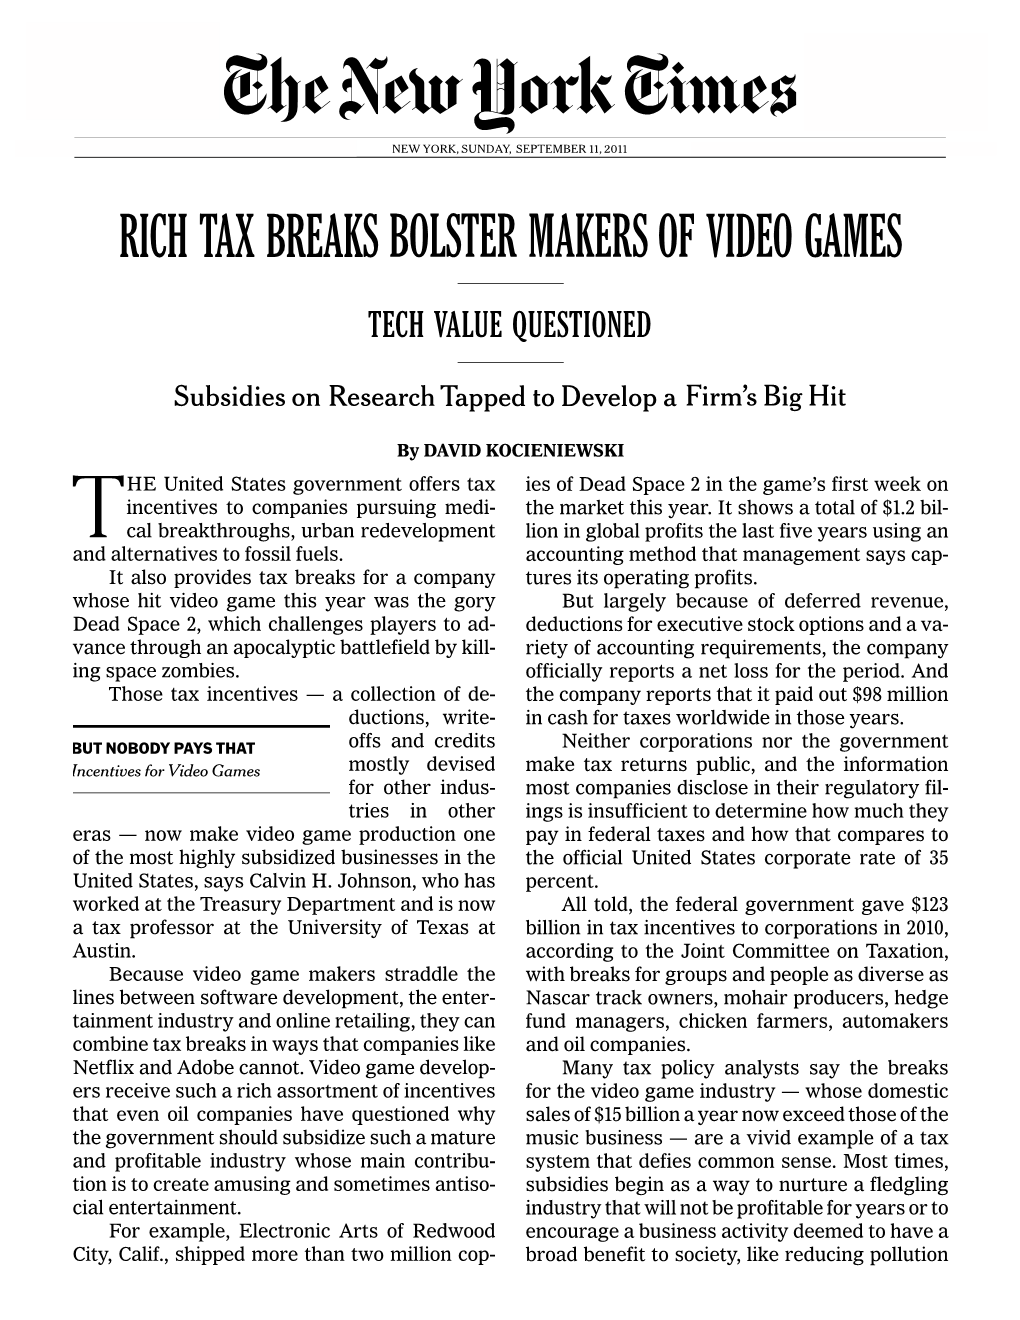 Bolster Makers of Video Games Rich Tax Breaks